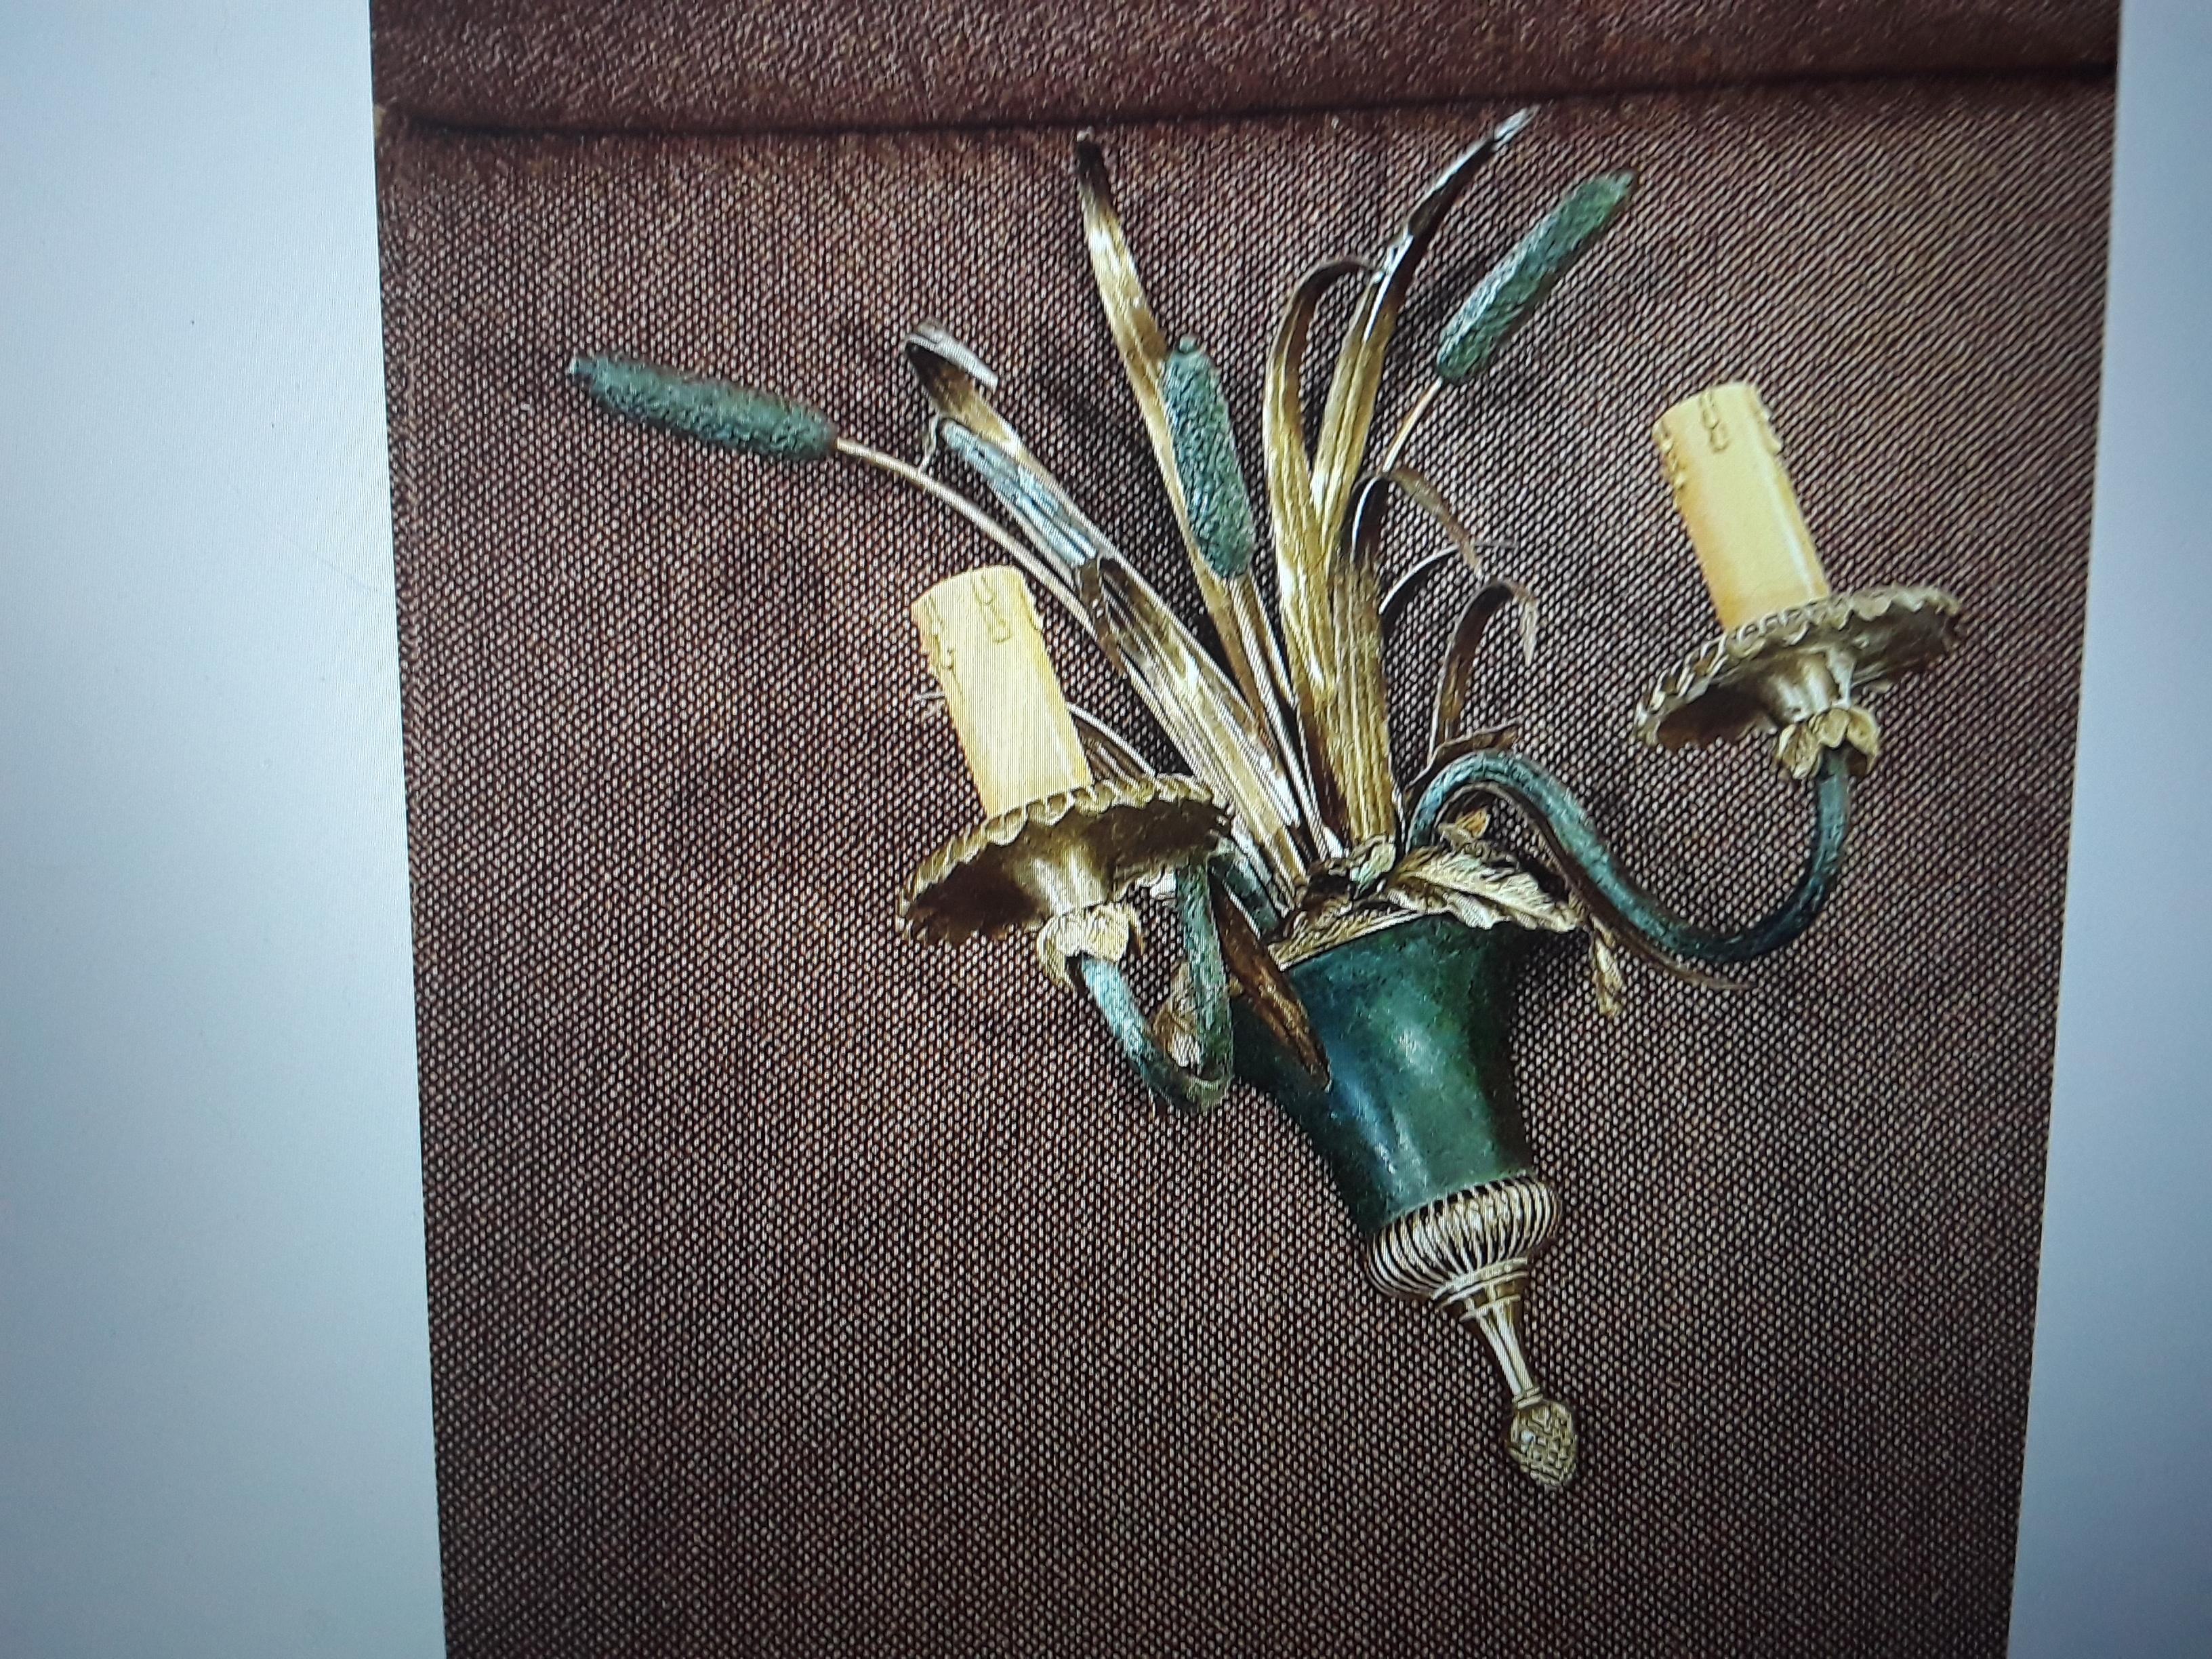 1940s French Regency Gilt &Patinated Bronze Floral Wall Sconce by Maison Charles For Sale 8